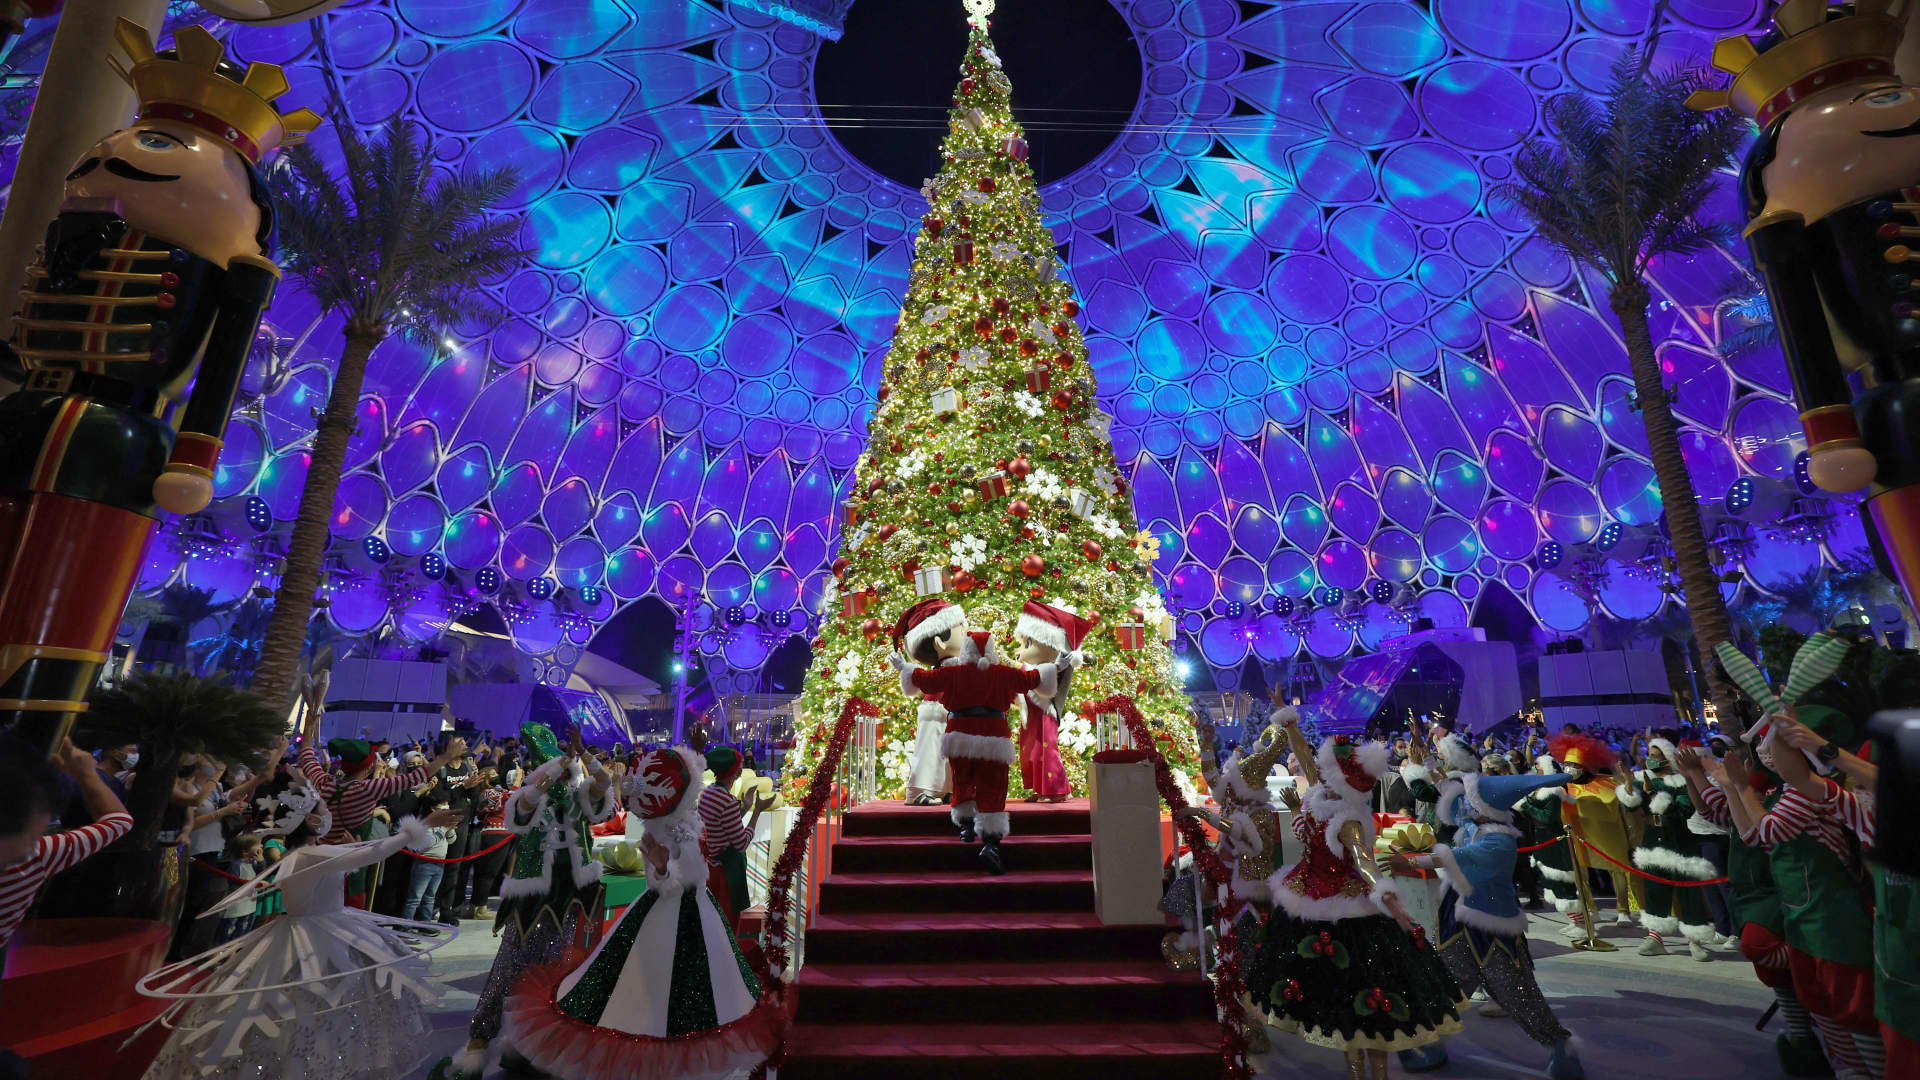 Dubai has lighting ceremonies of large, elaborately decorated Christmas trees, like this one at the Al-Wasl Dome at the heart of Expo 2020 Dubai.